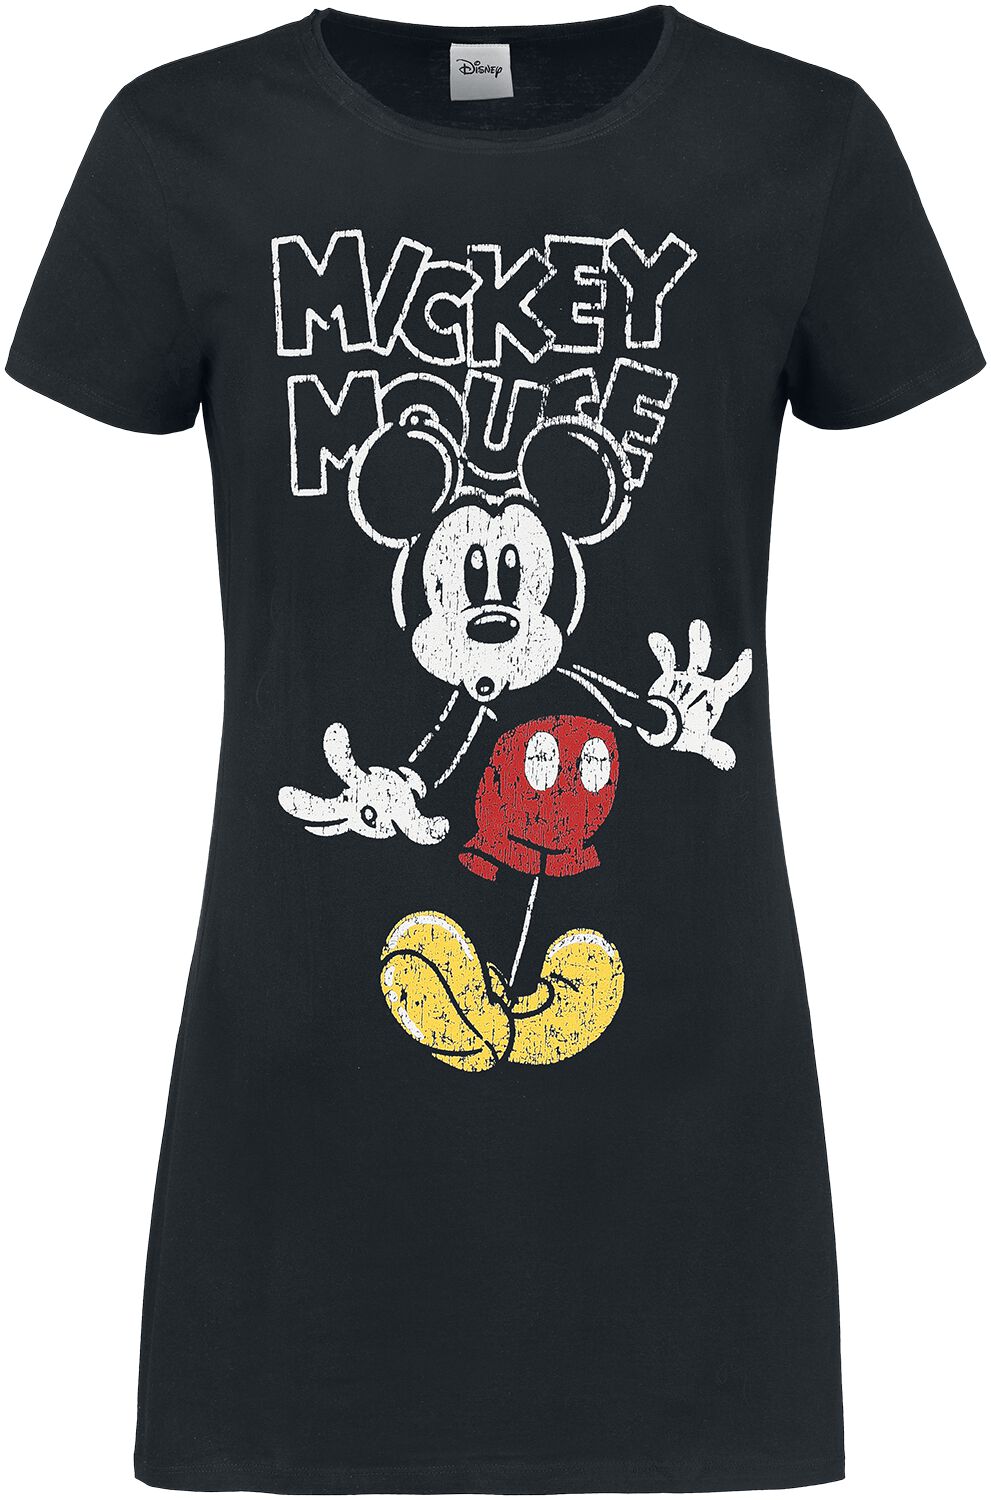 Mickey Mouse - Mickey Mouse - Kleid knielang - schwarz - EMP Exklusiv!